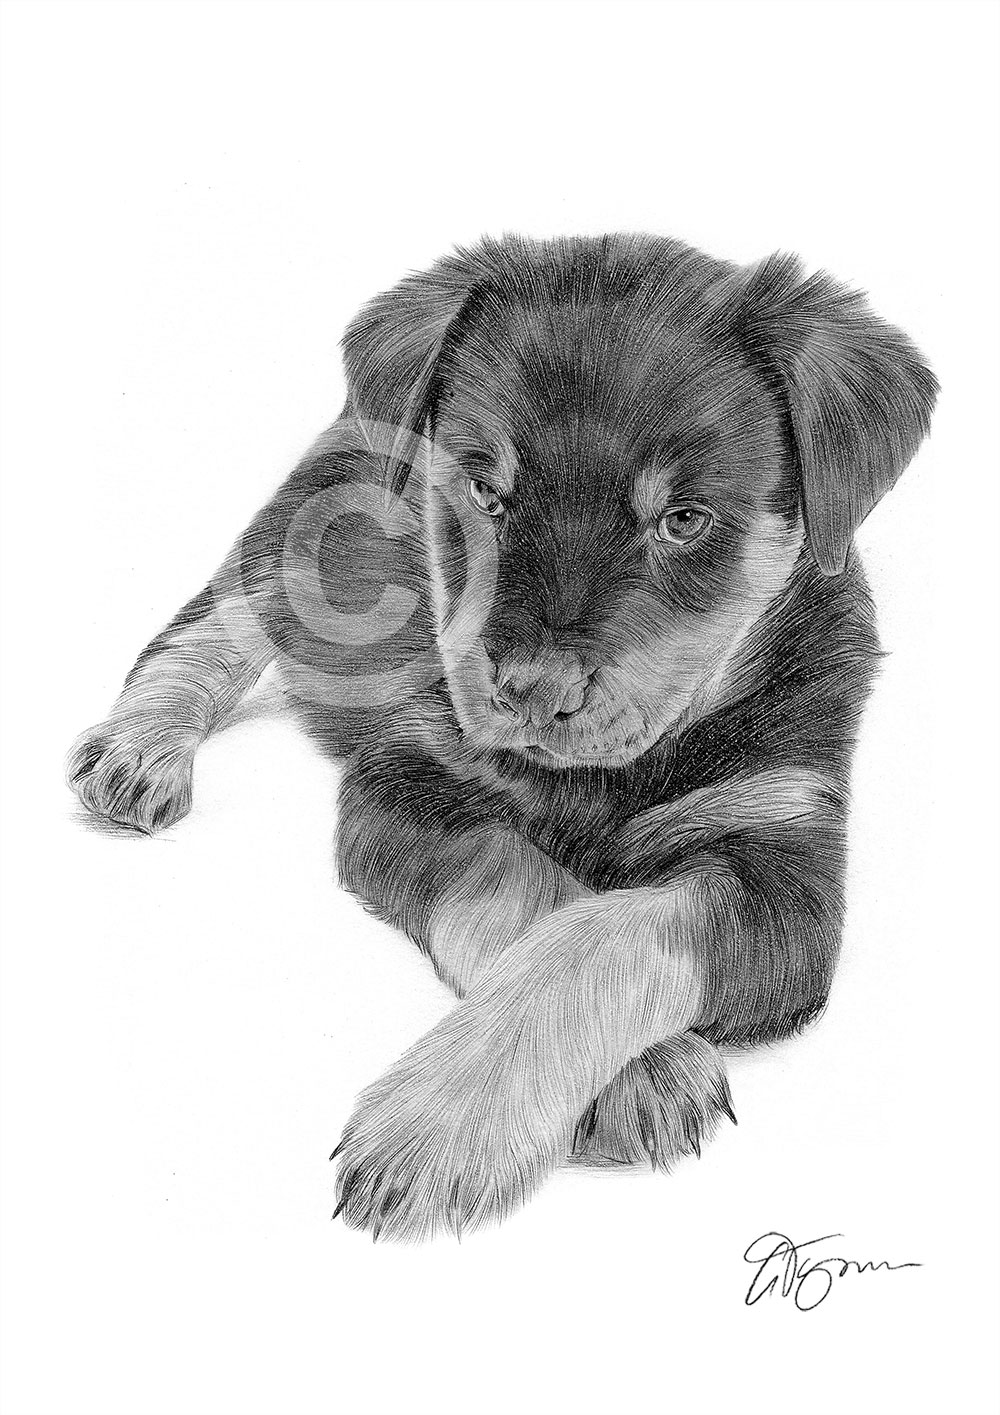 Pencil drawing of a Rottweiler puppy by artist Gary Tymon